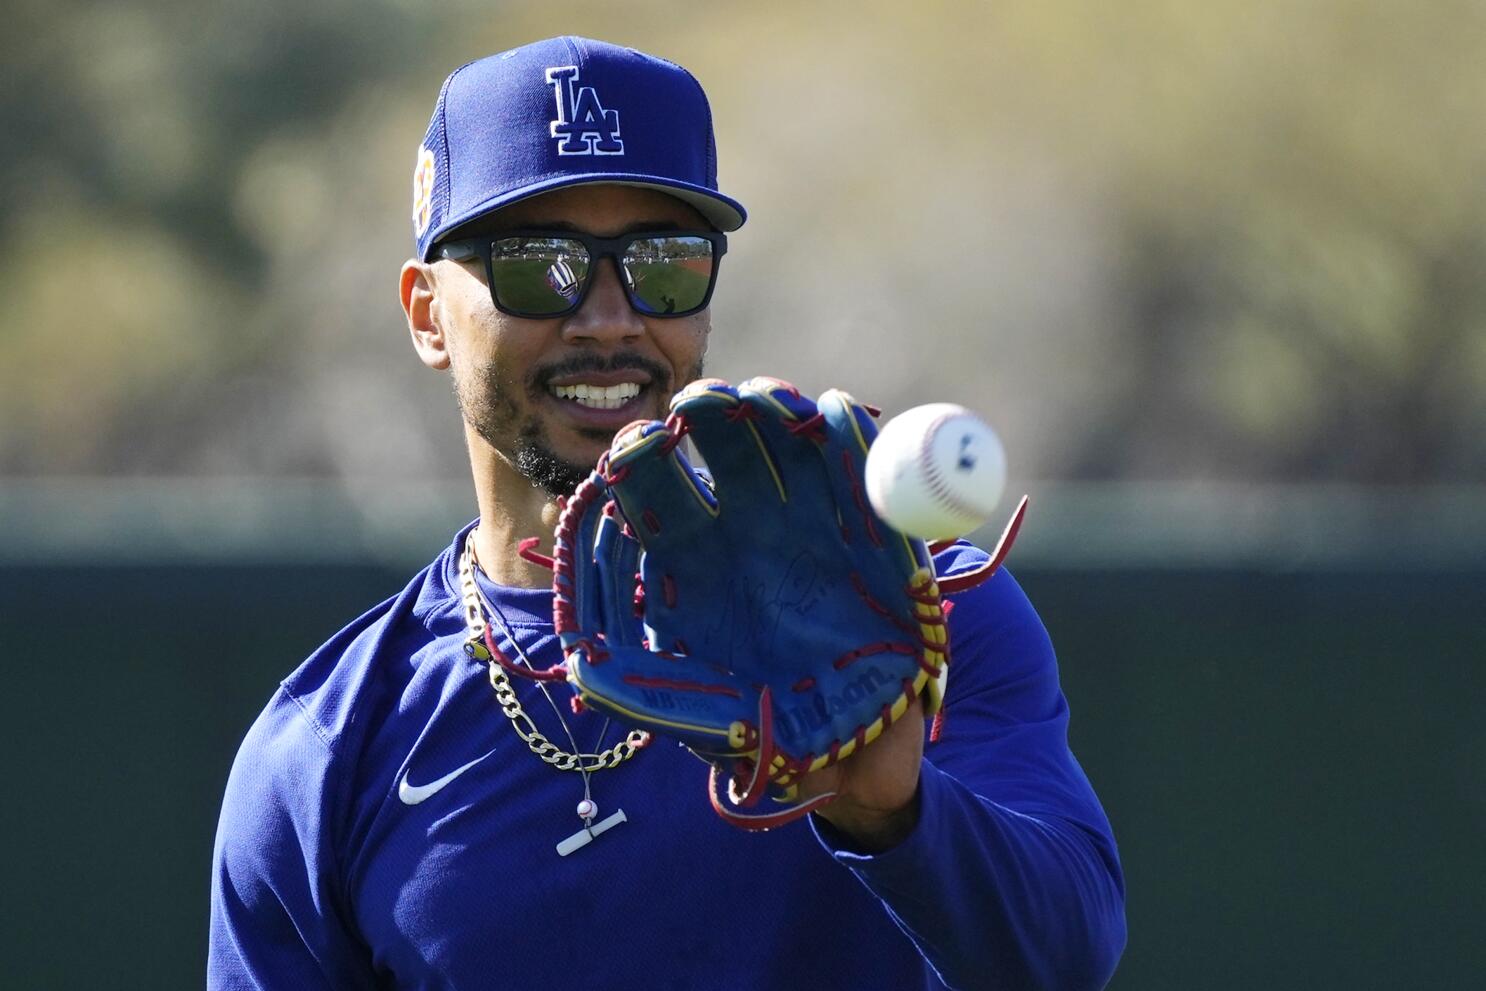 Spring Training Preview: Julio Urías Makes Final Tuneup Before Opening Day;  Mookie Betts Returns To Dodgers Lineup Vs. Brewers